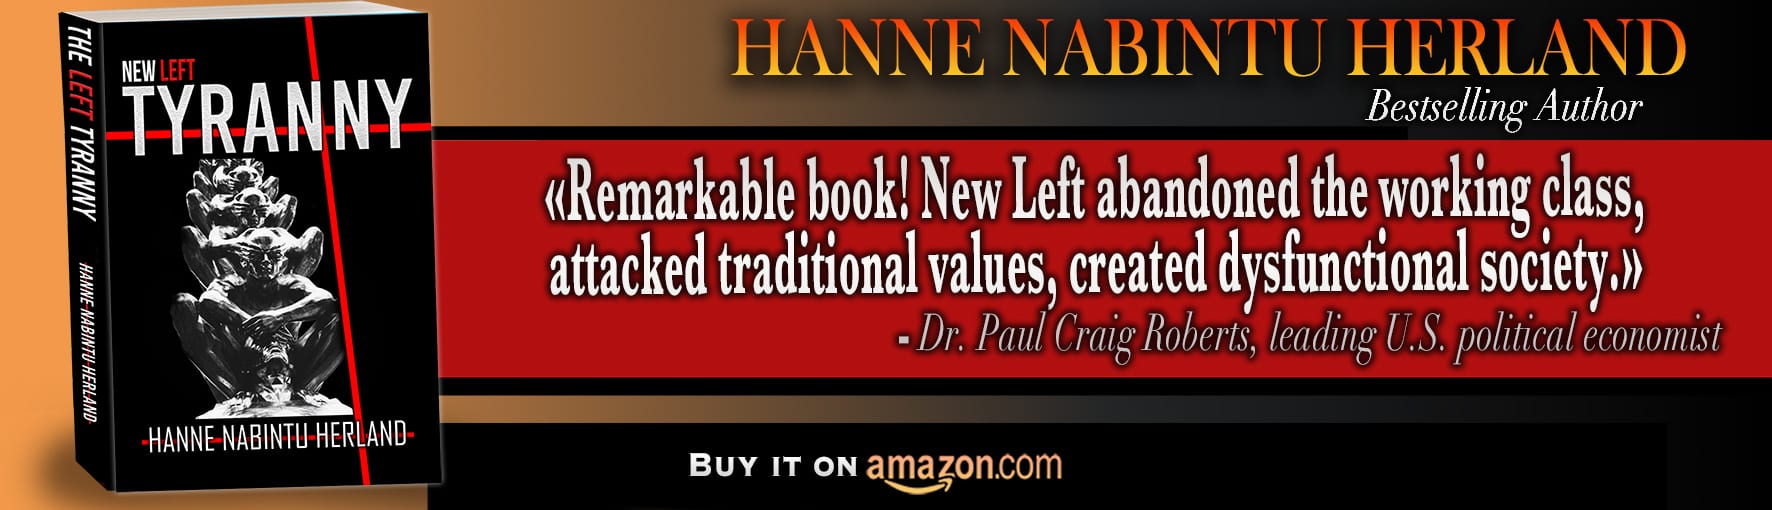 New Left Tyranny, by bestselling author Hanne Herland